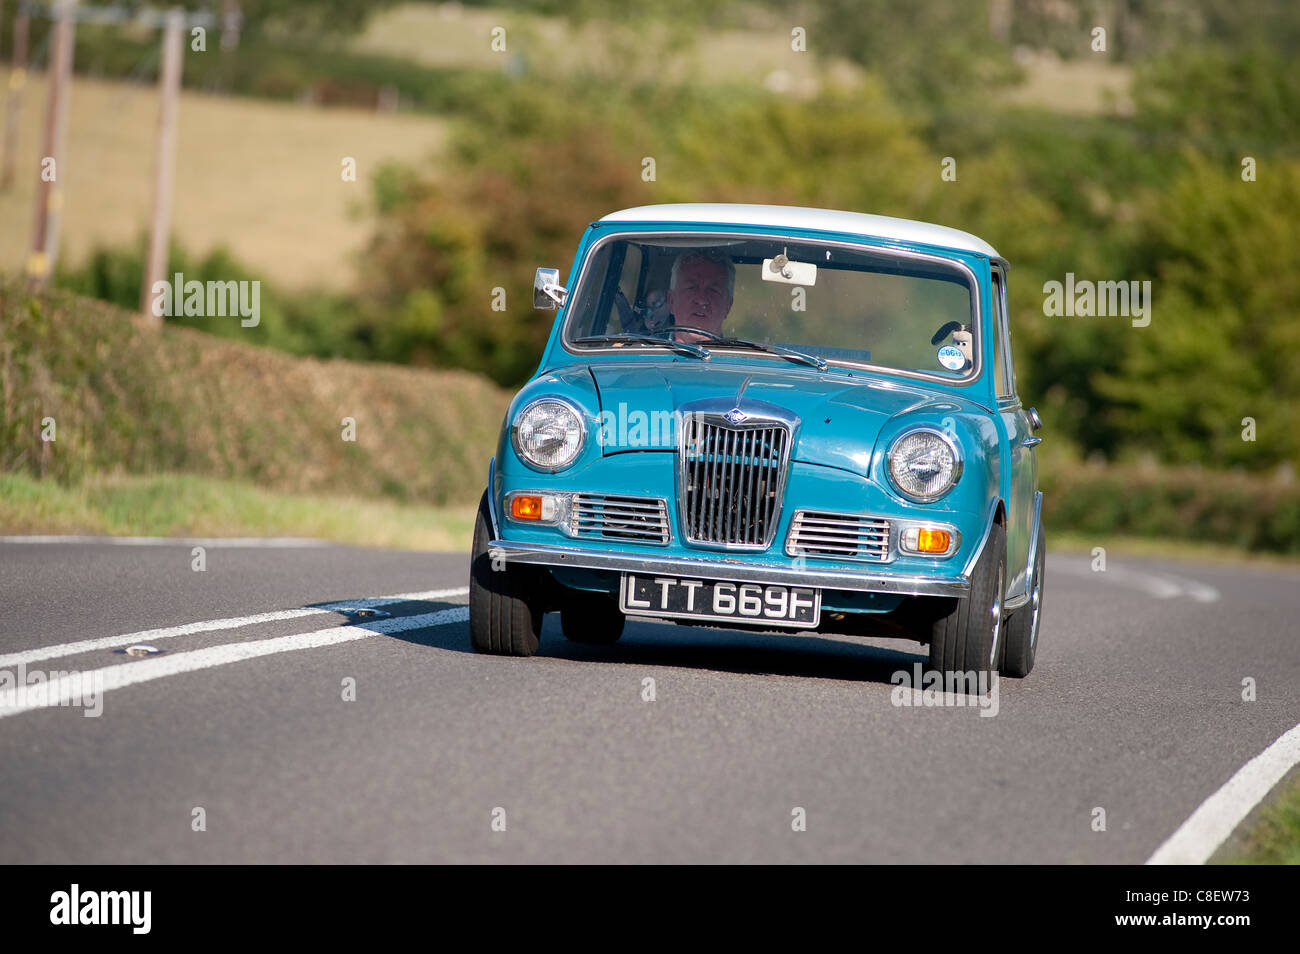 1967 Riley Elf classic car being driven on a road in England. Stock Photo